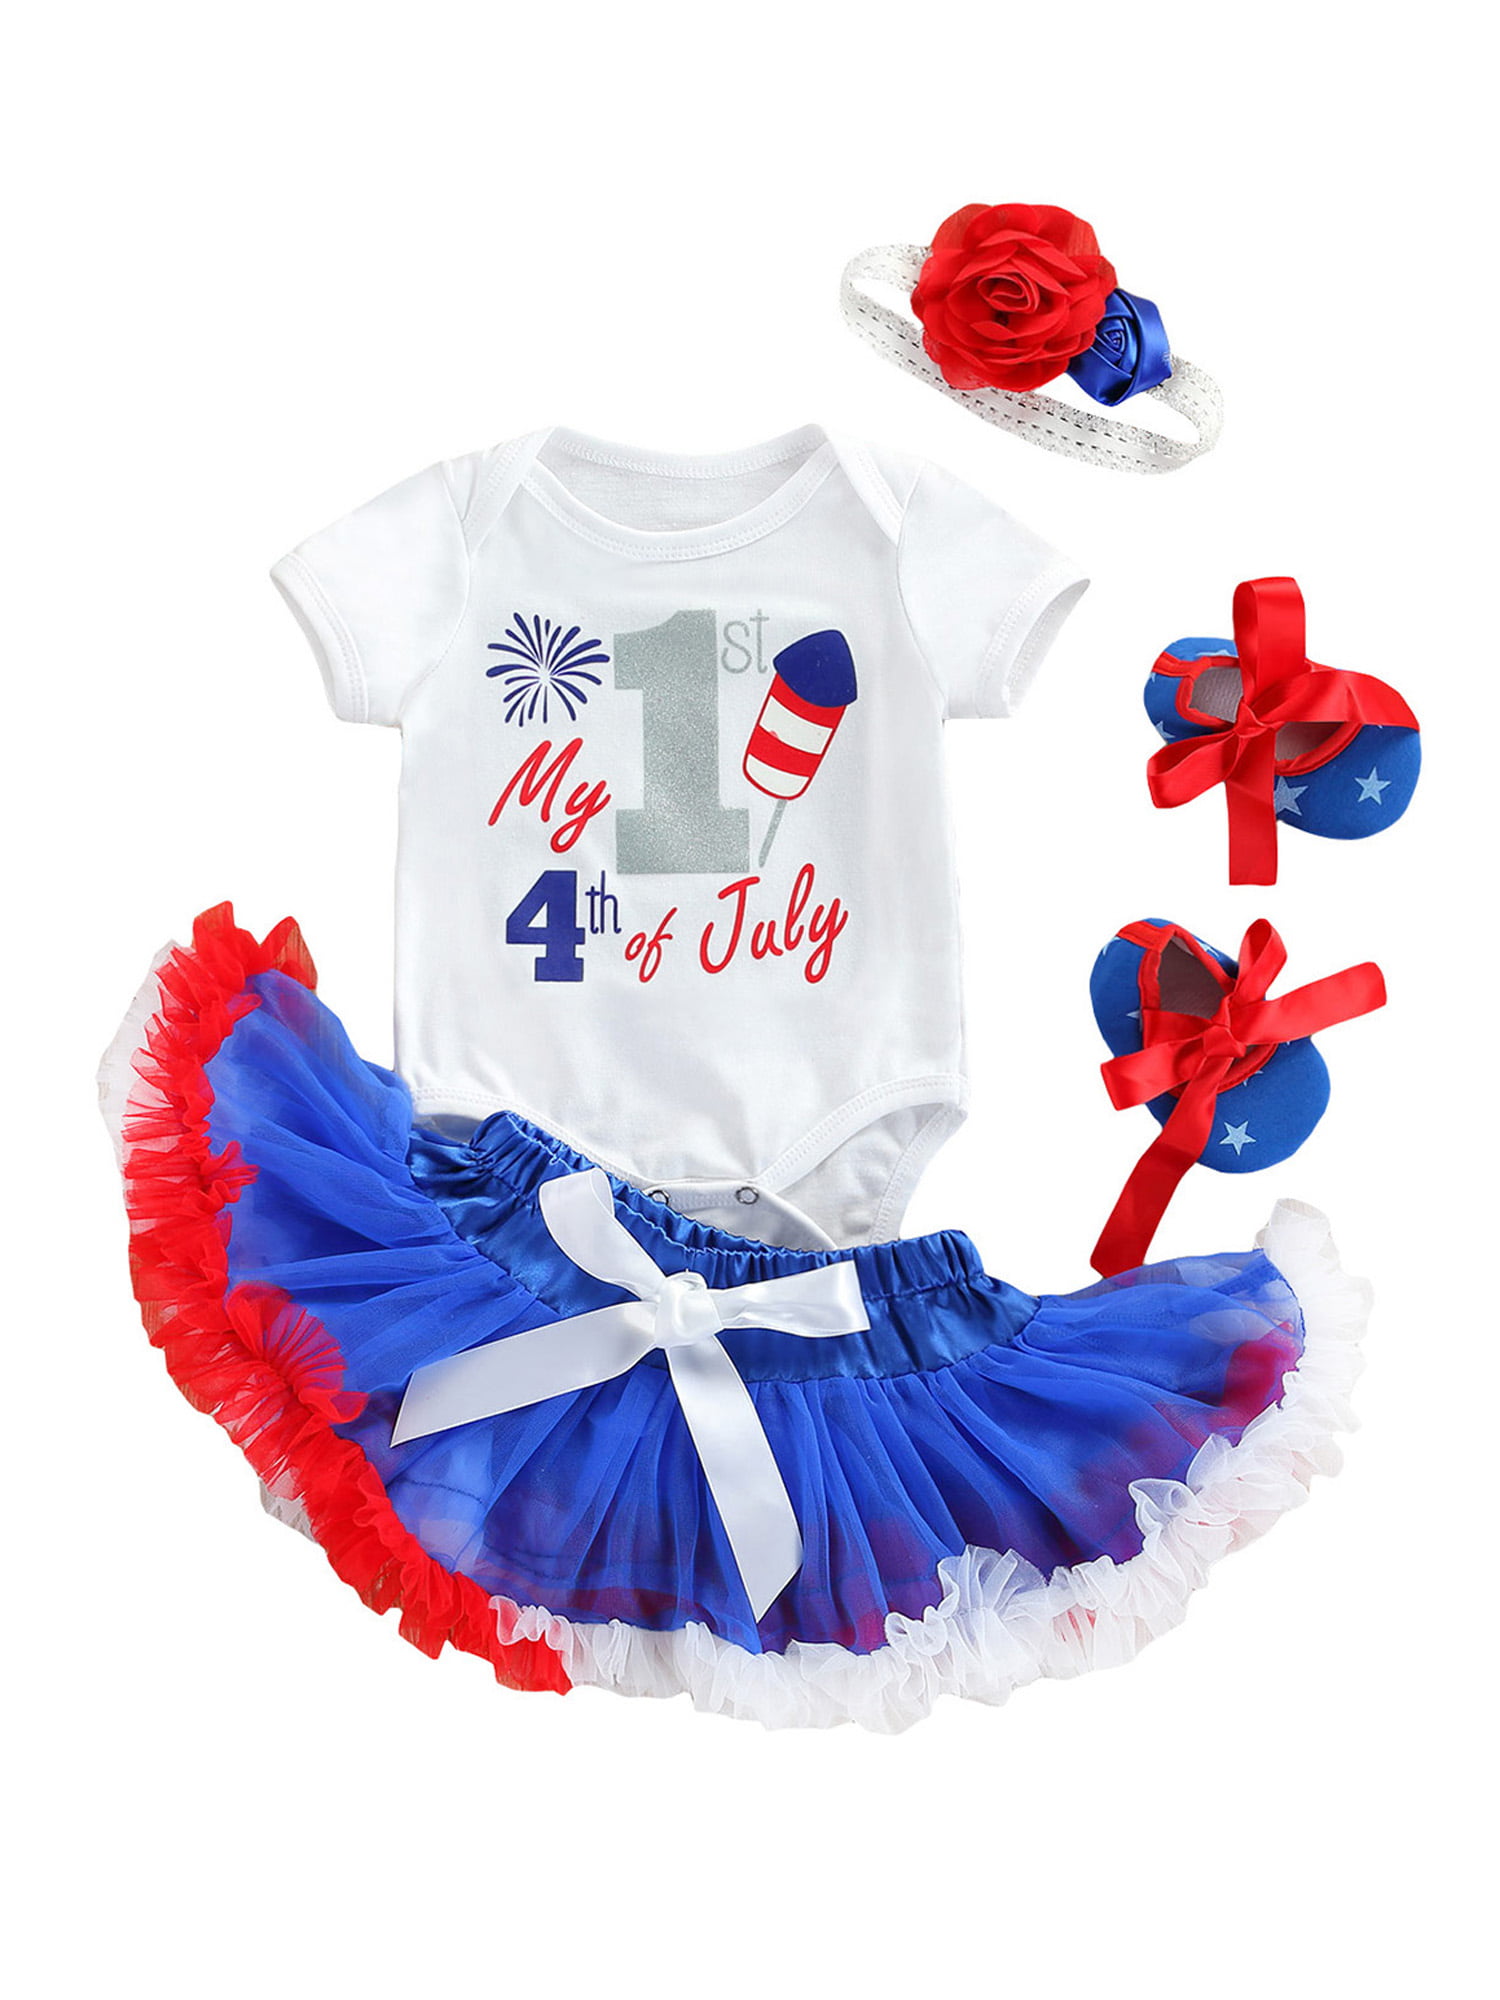 4th of July Newborn Kids Baby Girls Romper Tutu Dress Jumpsuit Clothes Outfits 